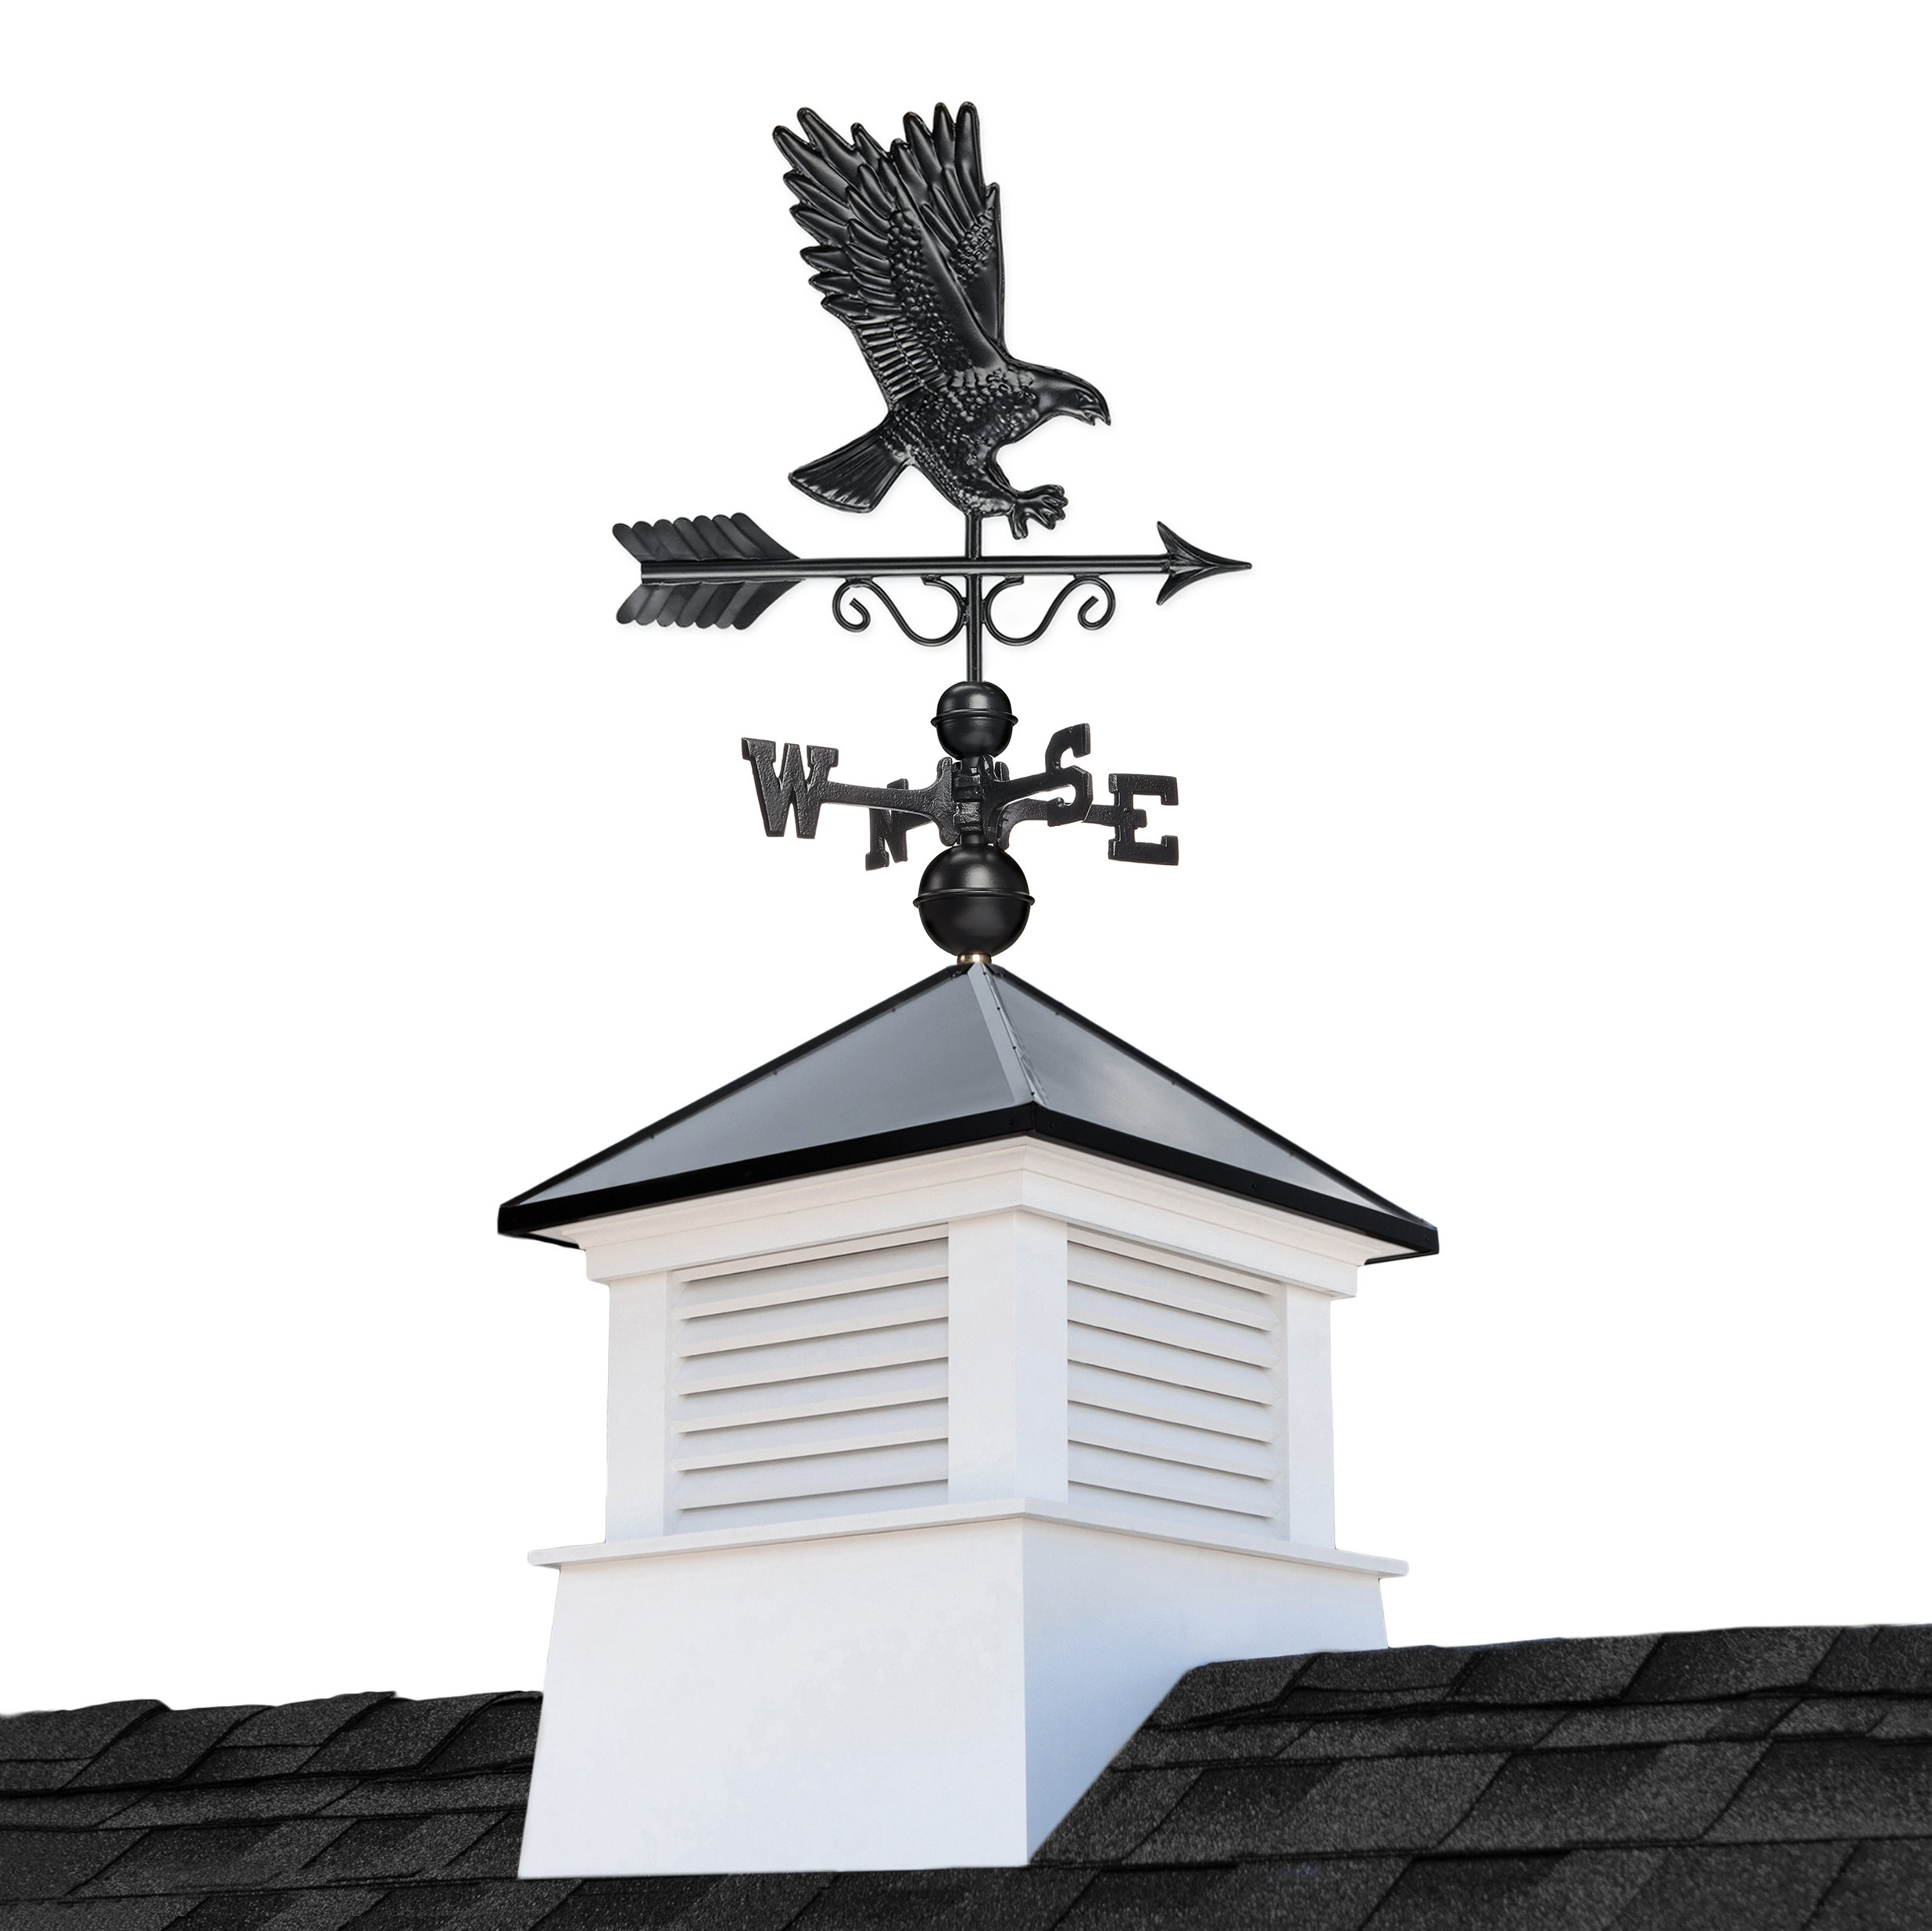 Whitehall Products Decorative Wall Eagle, 36-Inch, Black